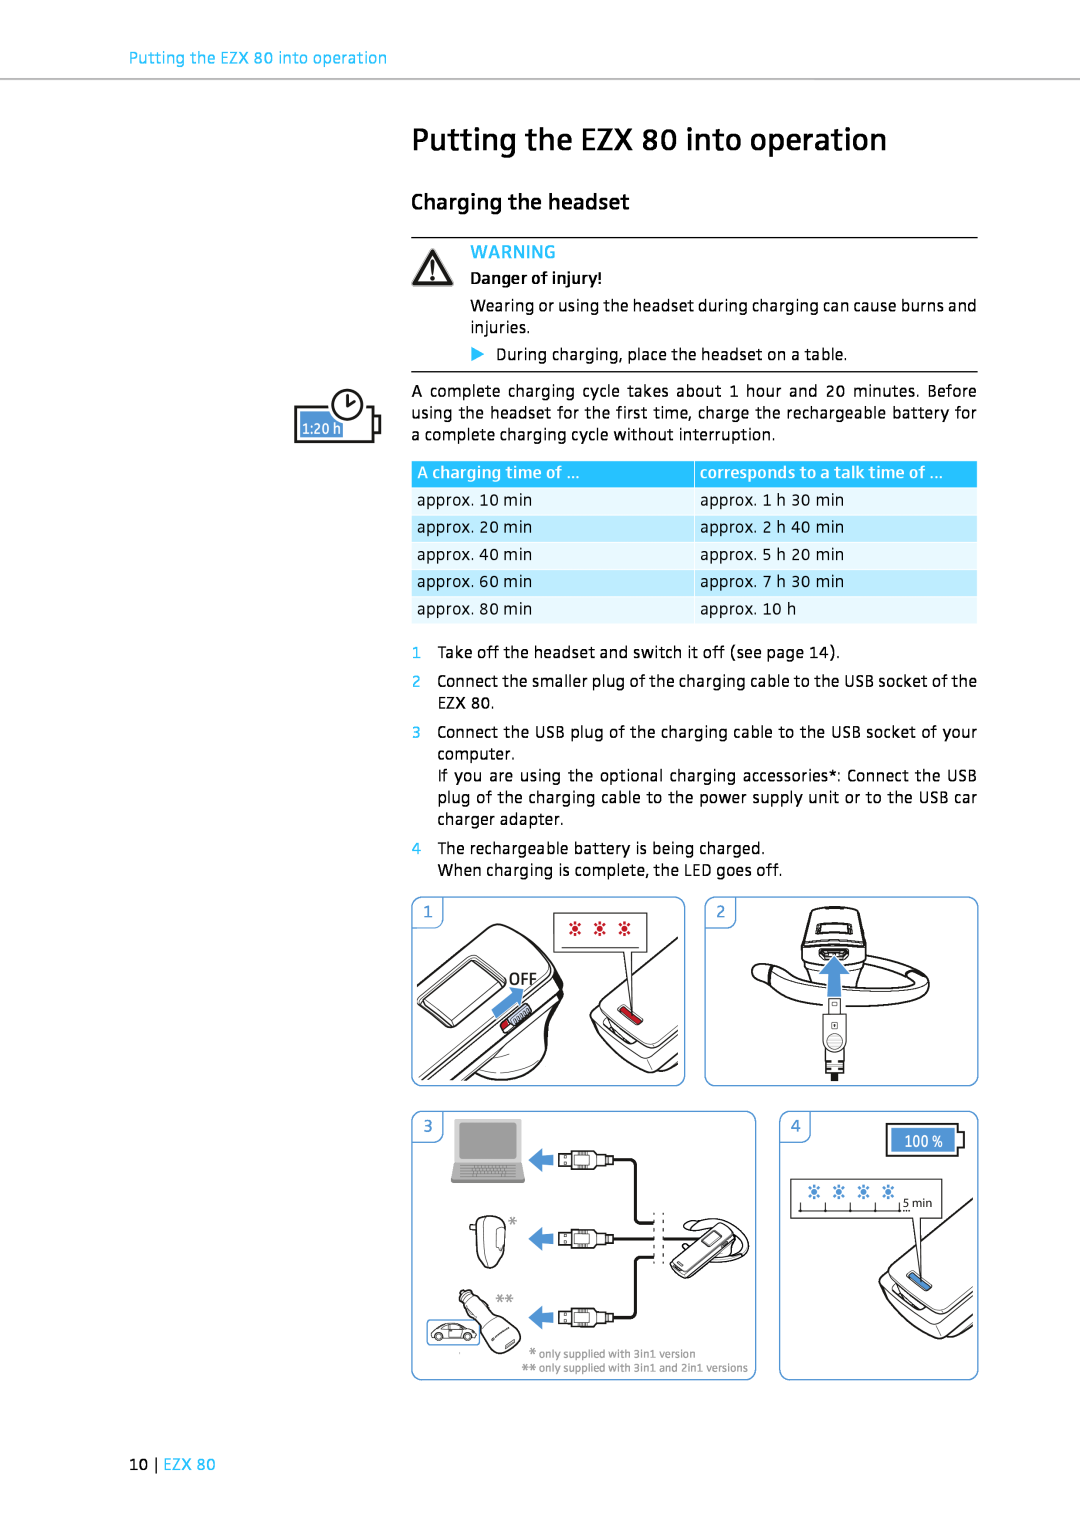 Sennheiser instruction manual Putting the EZX 80 into operation, Charging the headset, 10 EZX 